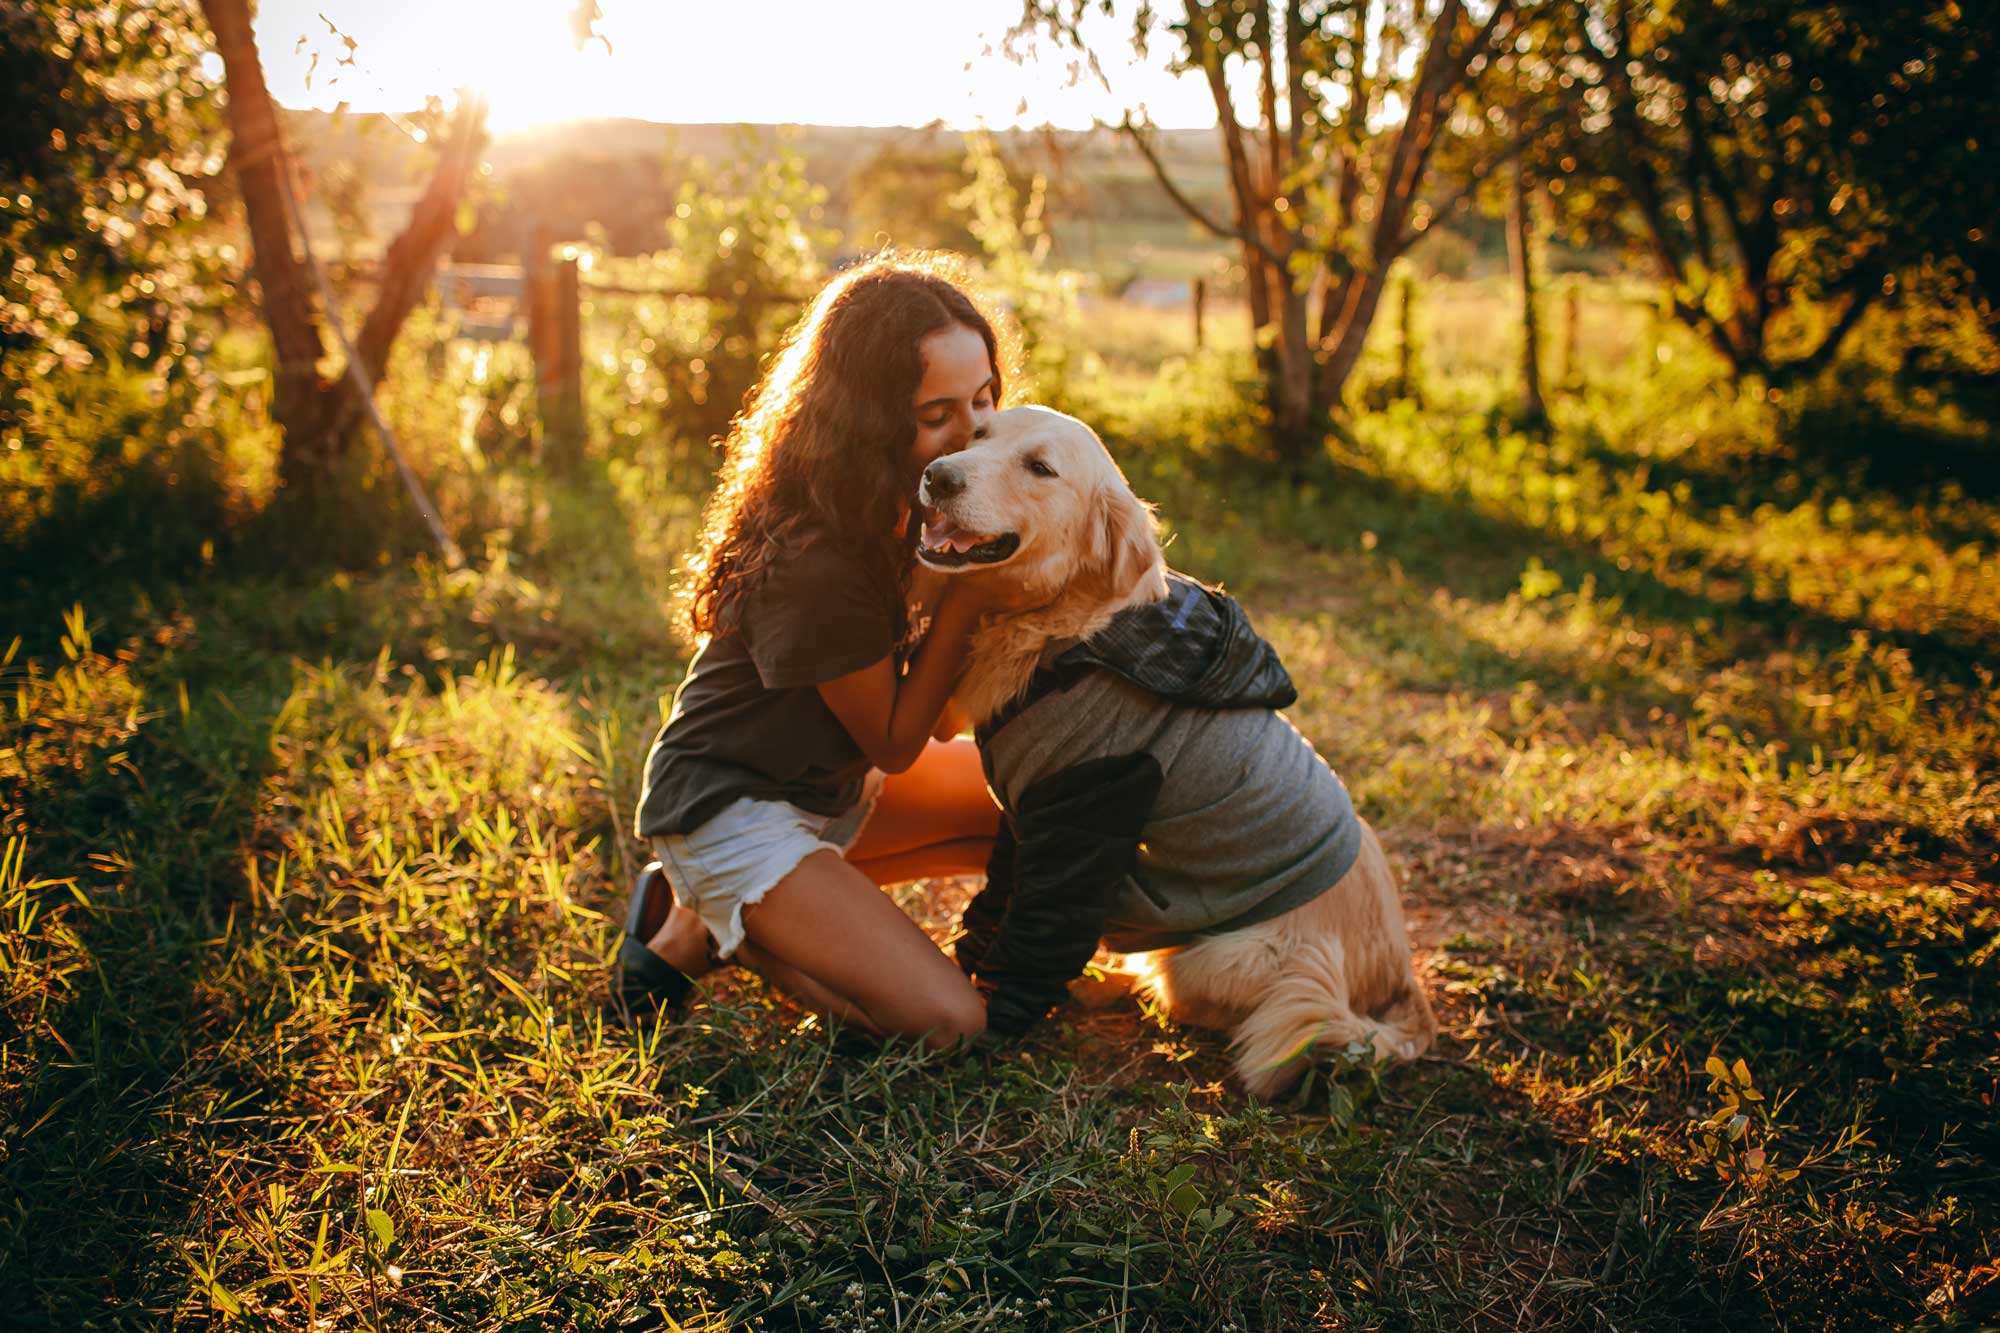 Trekking and special days out with your pet